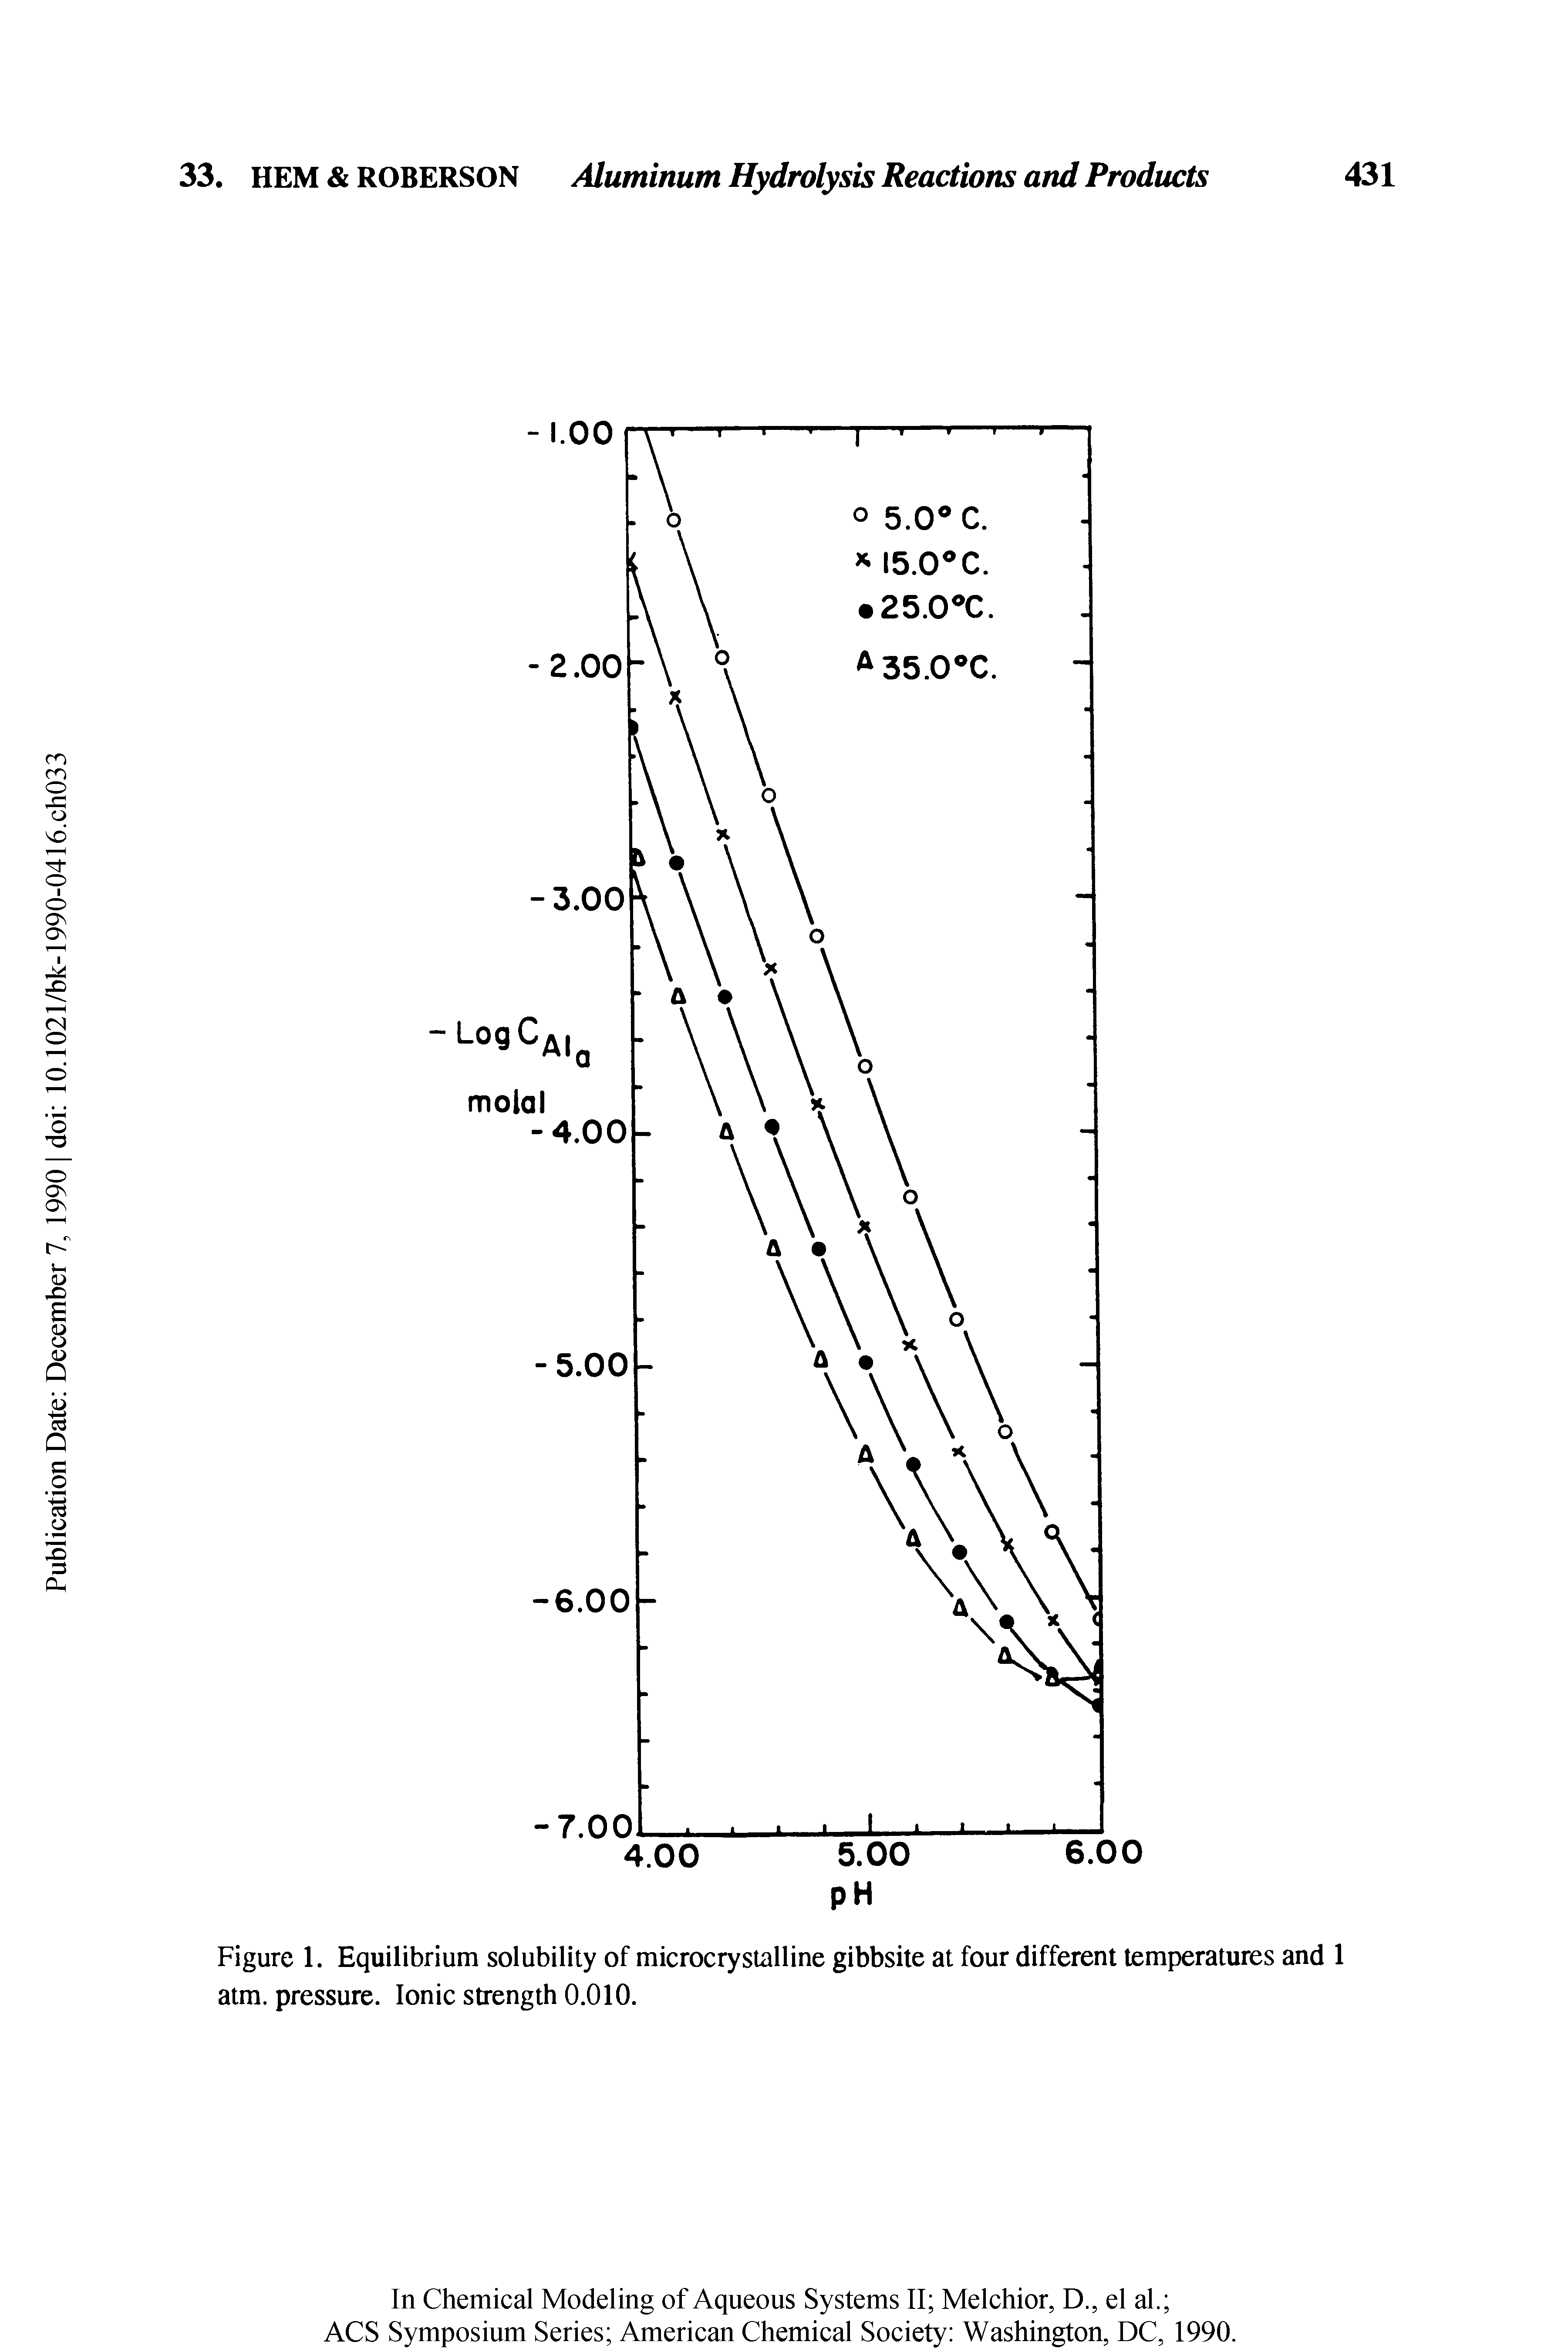 Figure 1. Equilibrium solubility of microcrystalline gibbsite at four different temperatures and 1 atm. pressure. Ionic strength 0.010.